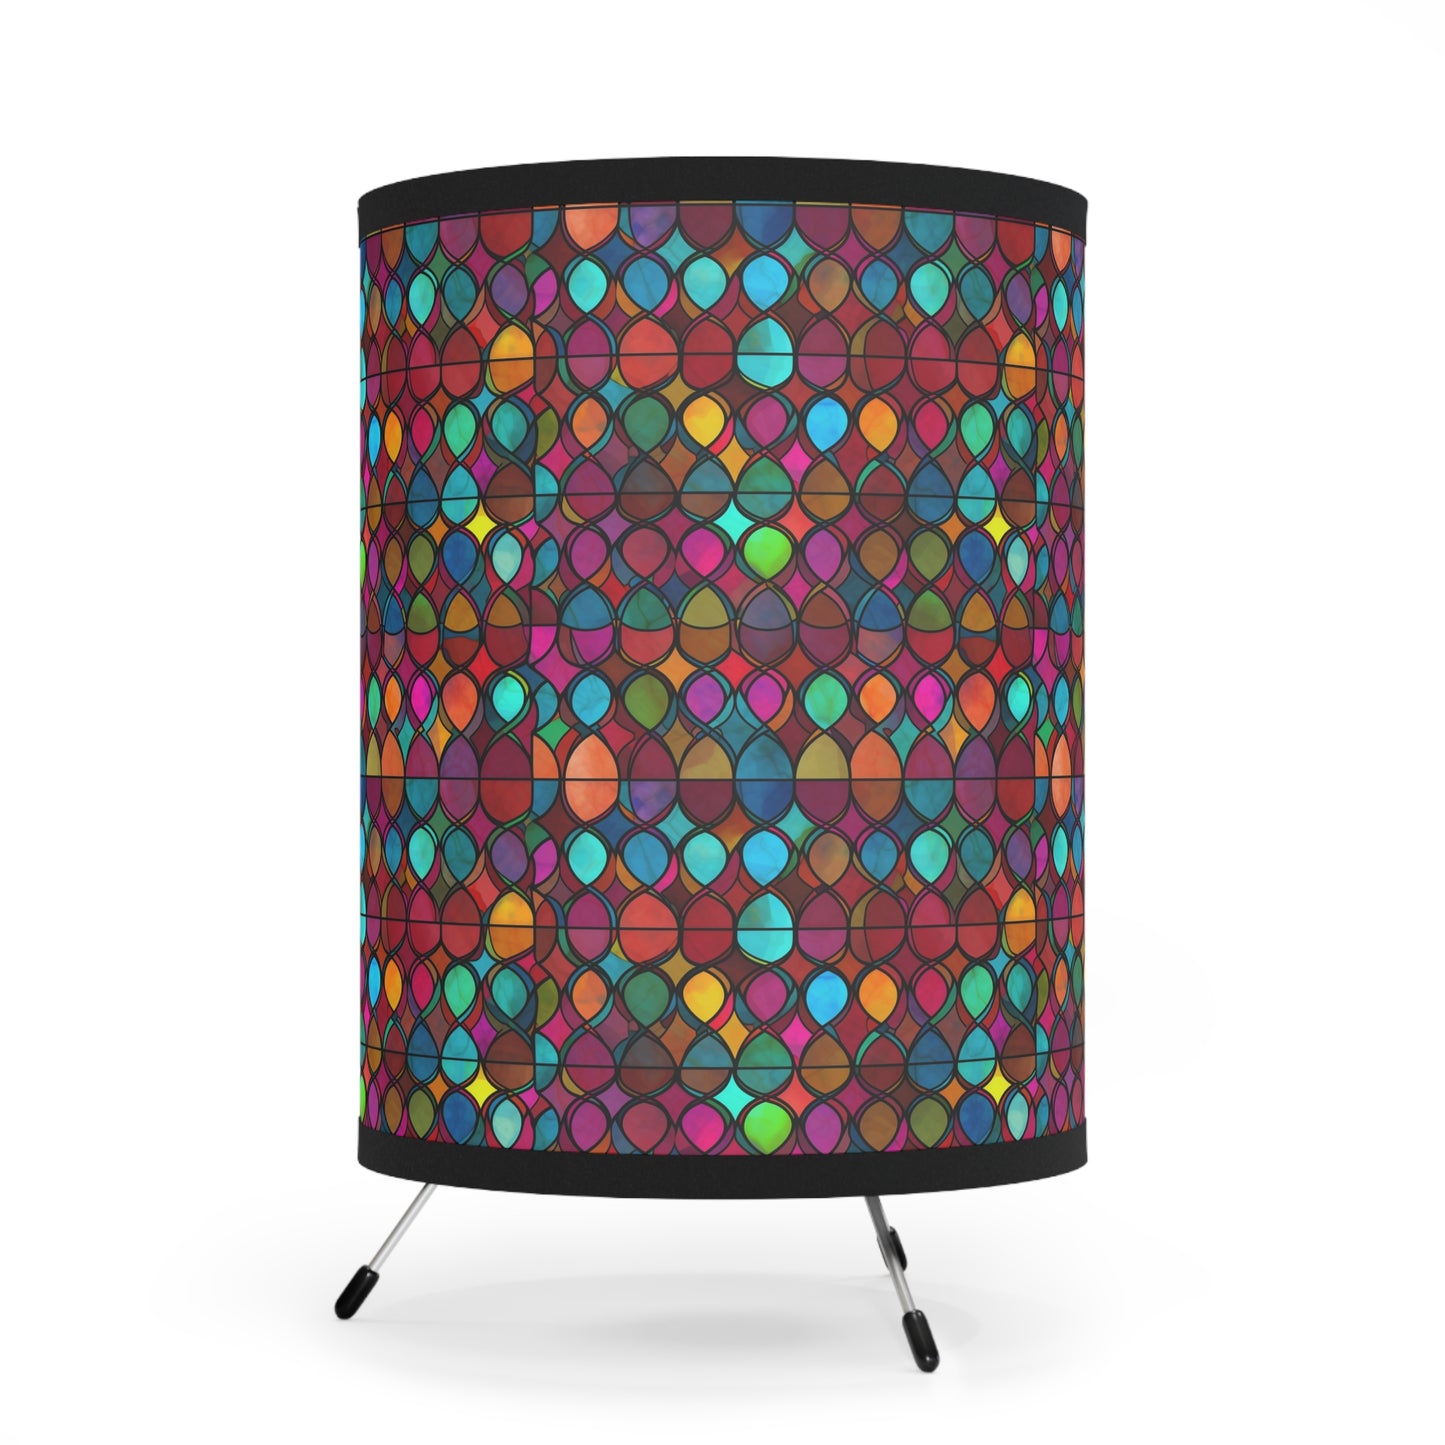 Stained Glass Mosaic Print - Tripod Lamp with High-Res Printed Shade, US\CA plug